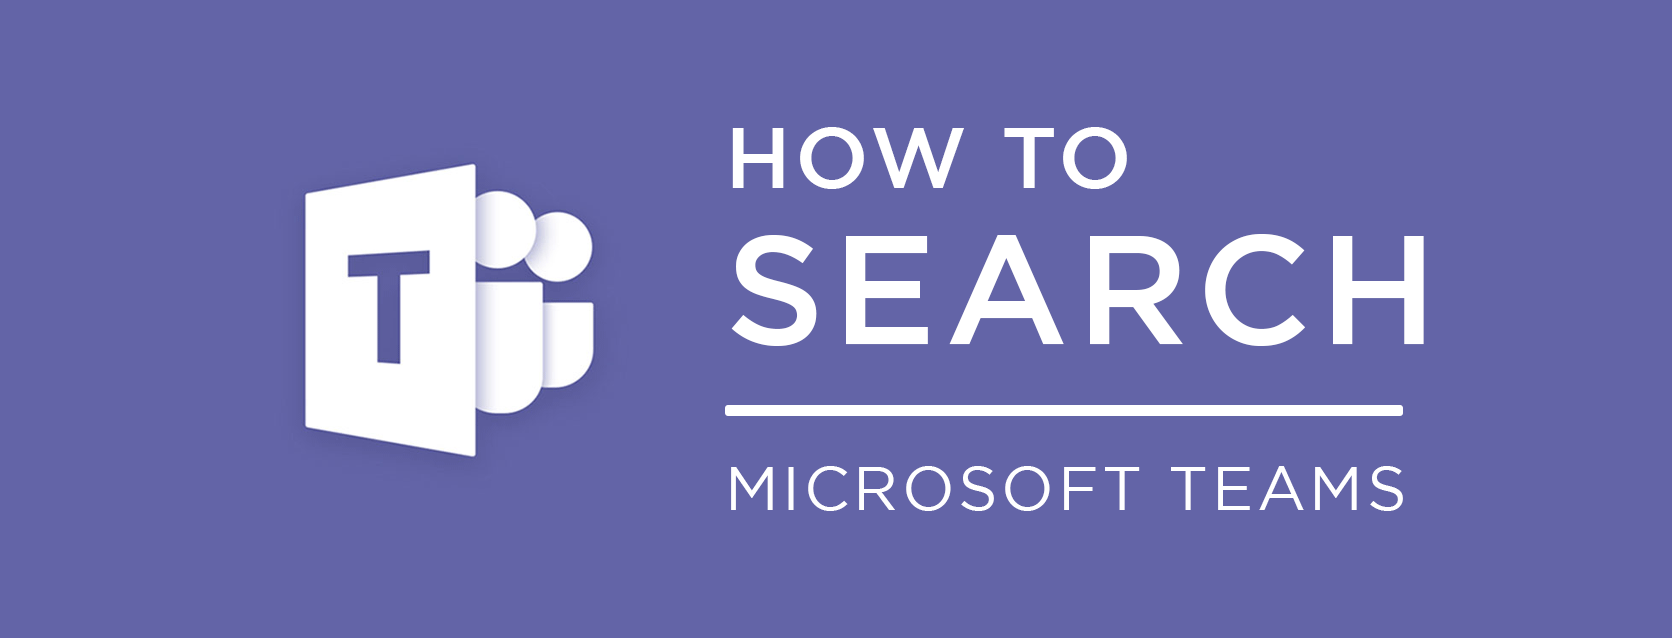 How to Search (for Everything) in Microsoft Teams